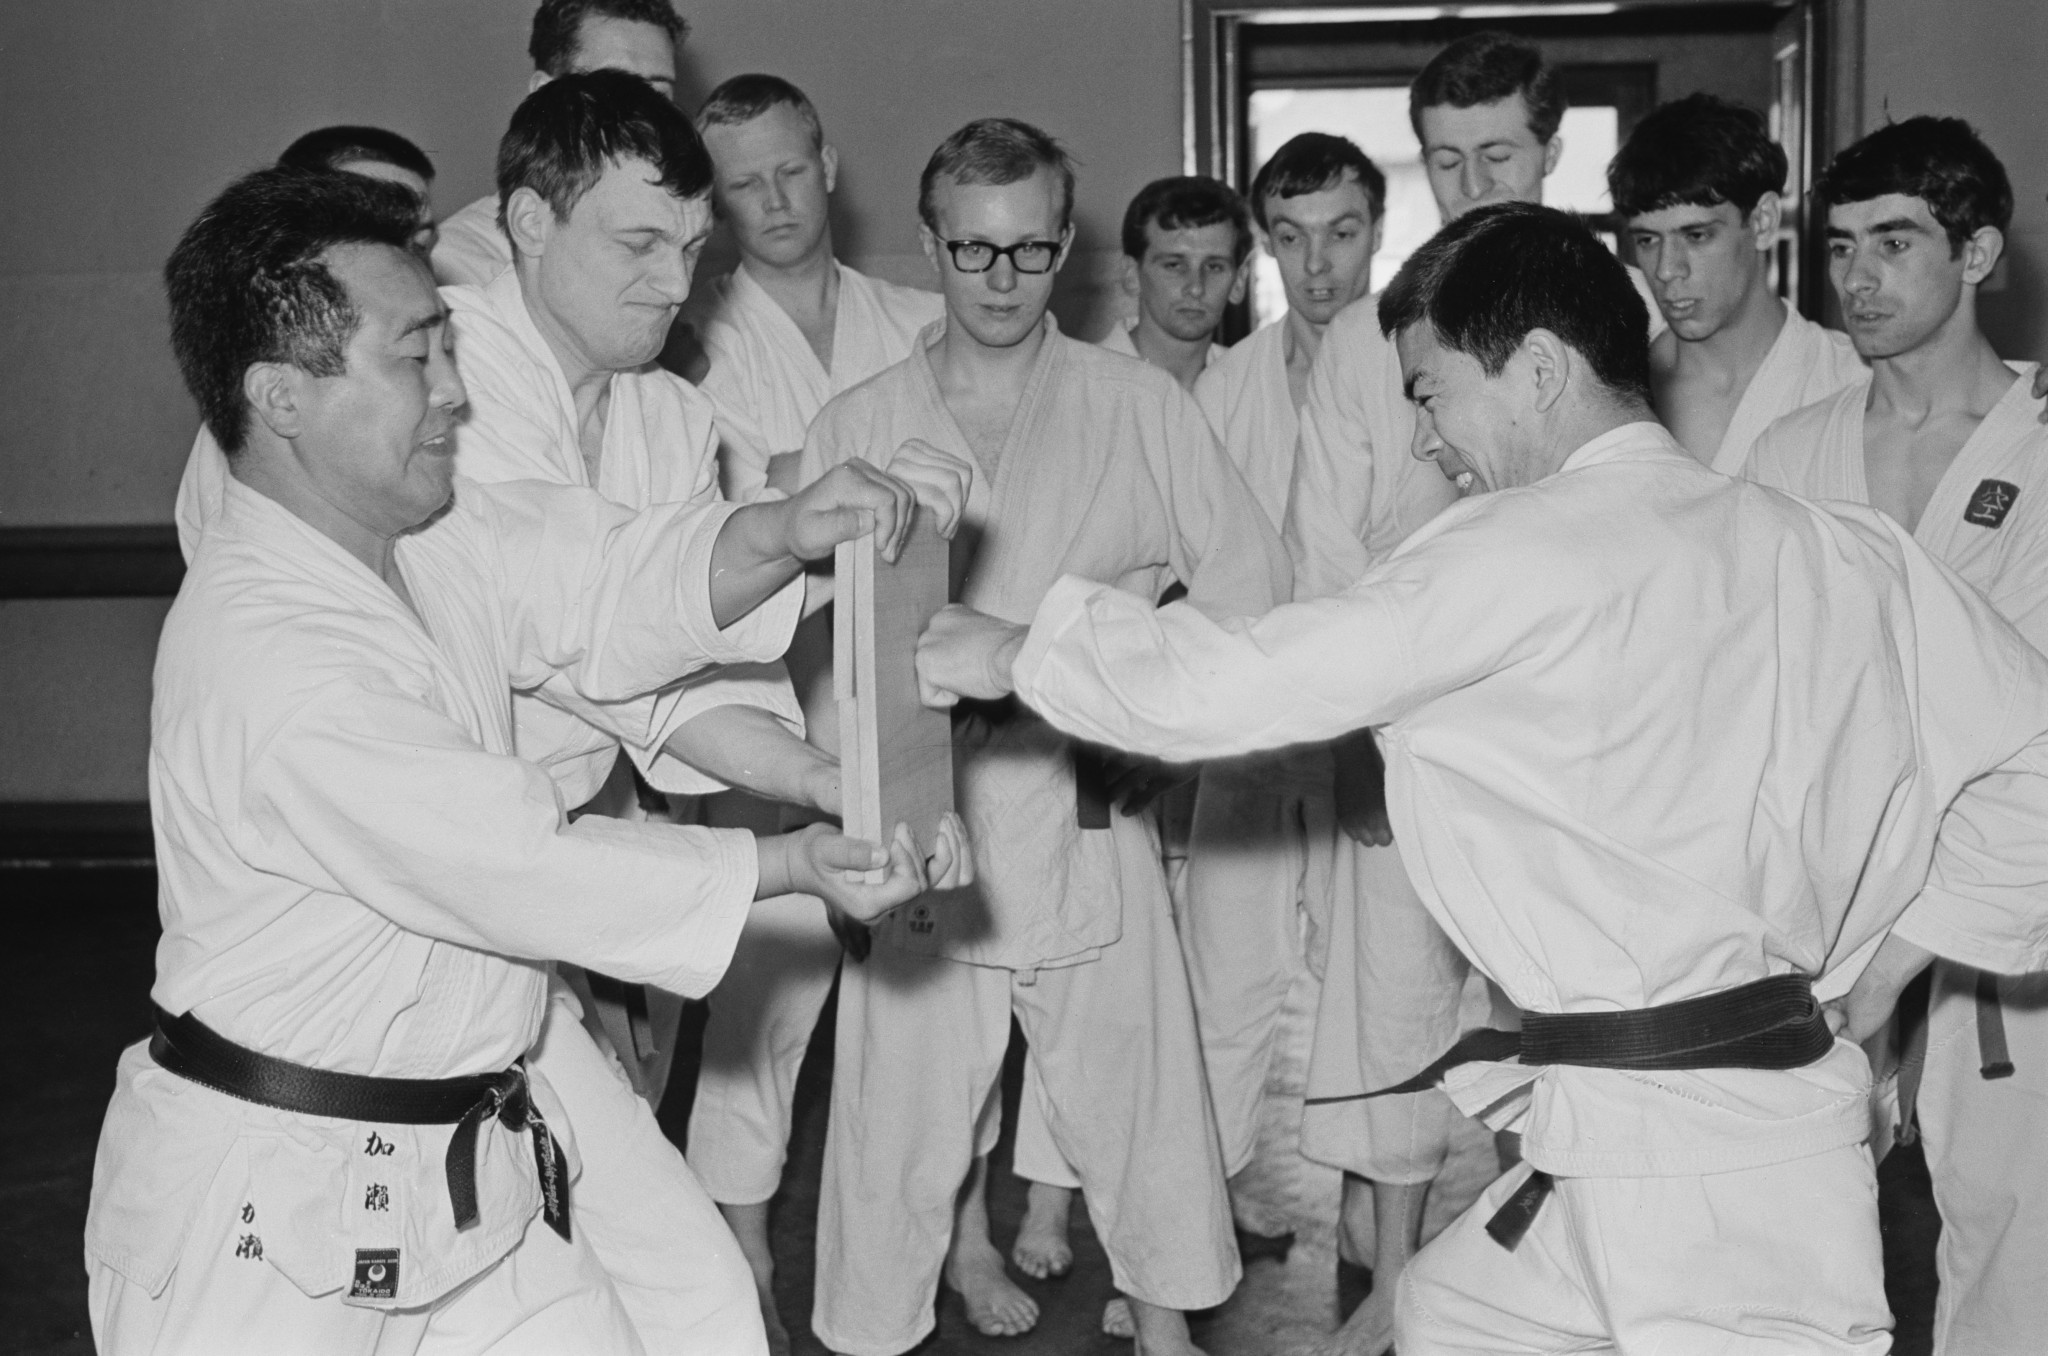 Japanese teacher of Shotokan karate Hirokazu Kanazawa demonstrating the breaking of a piece of wood in front of a group of students, UK, 2nd May 1965 ©Getty Images